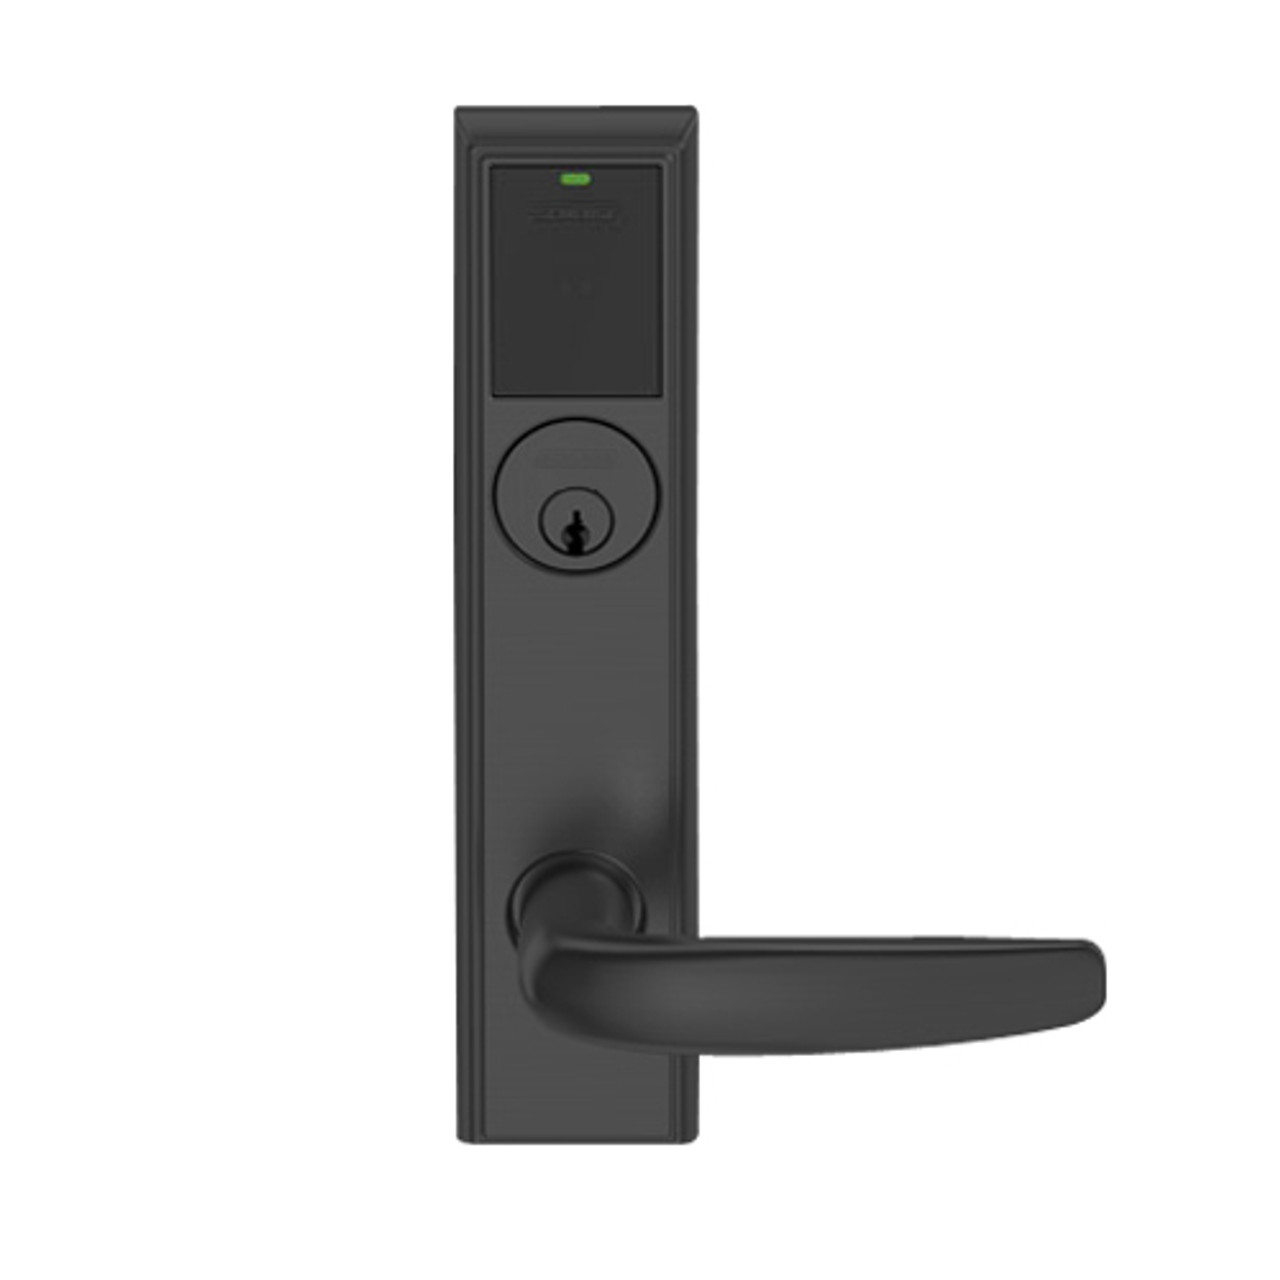 LEMD-ADD-P-07-622 Schlage Privacy/Apartment Wireless Addison Mortise Deadbolt Lock with LED and Athens Lever in Matte Black